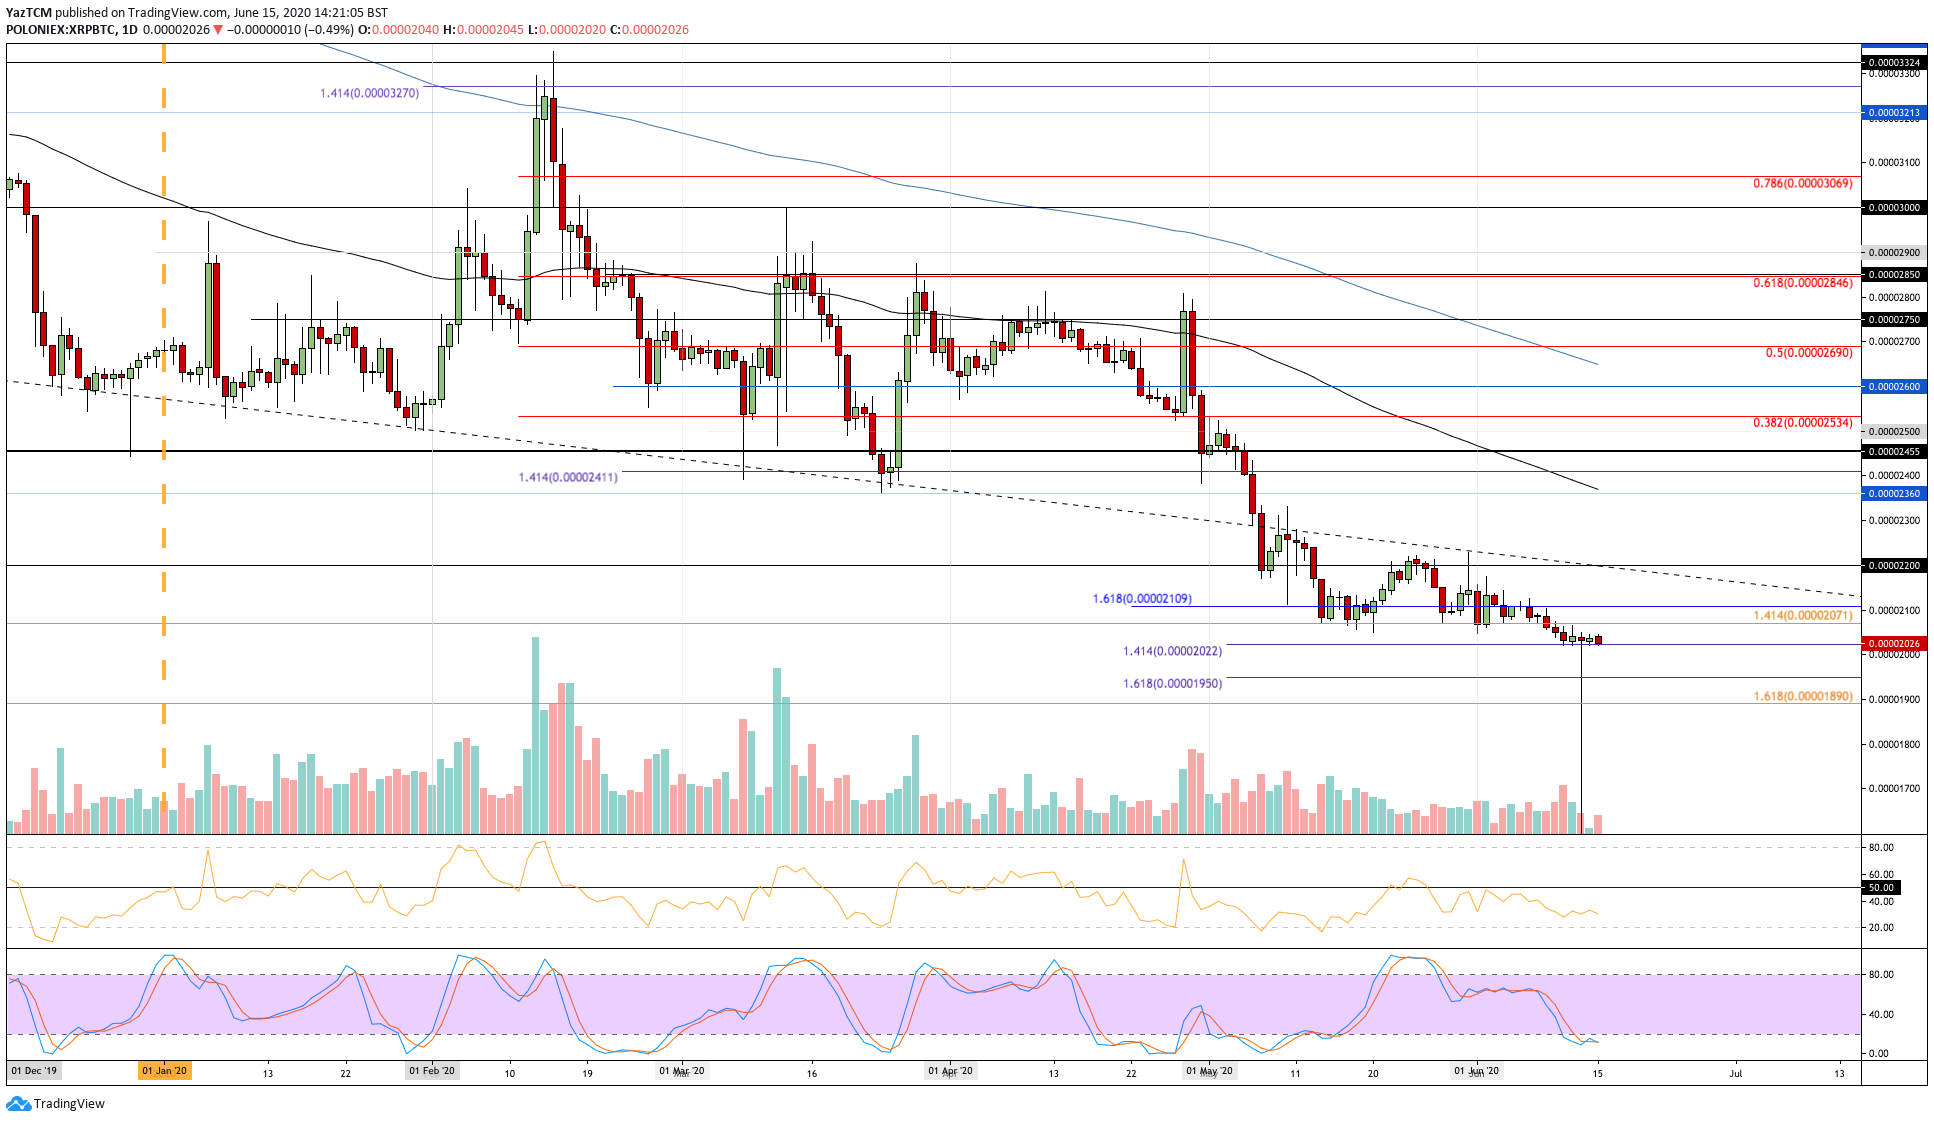 Ripple Price Analysis: Potential Disaster For XRP Following a Drop Below $0.19